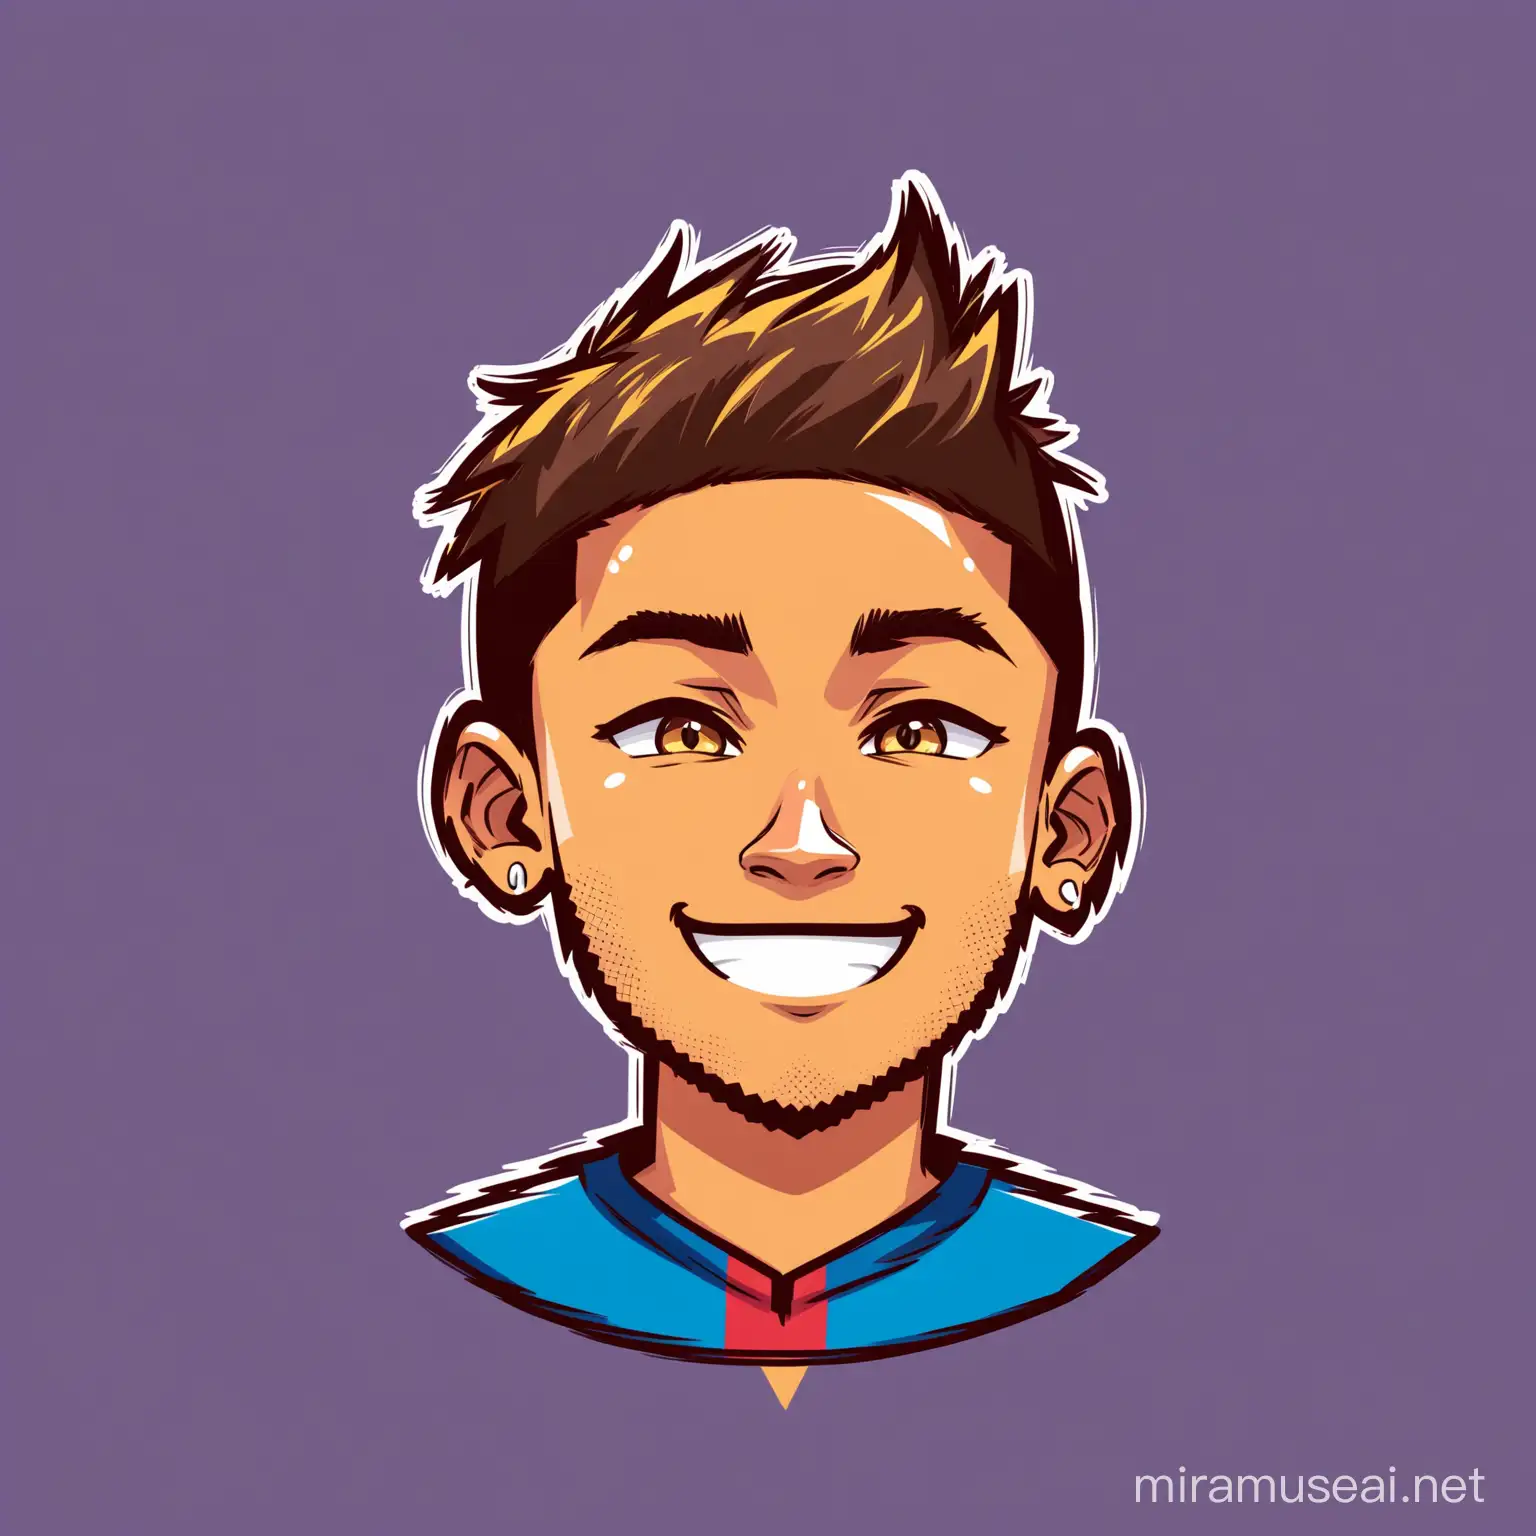 Cartoon Icon of Neymar Playful and Colorful Soccer Character Art